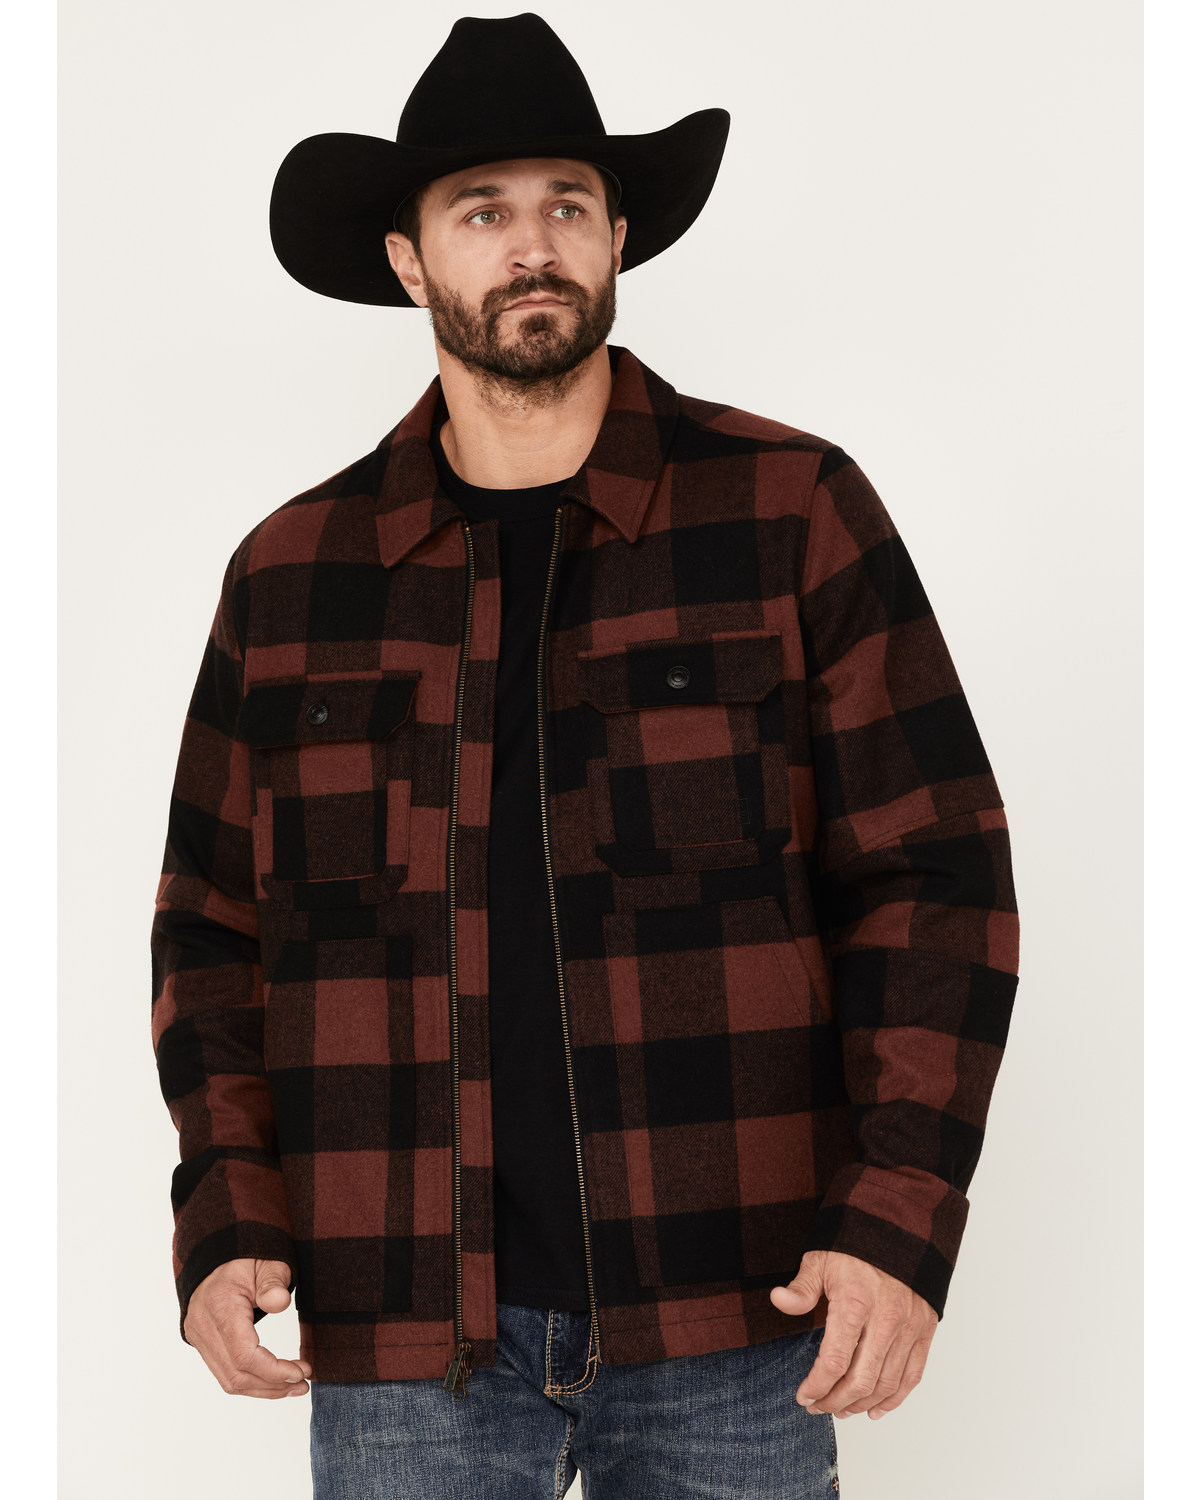 Brothers and Sons Men's Plaid Print Wool Western Jacket